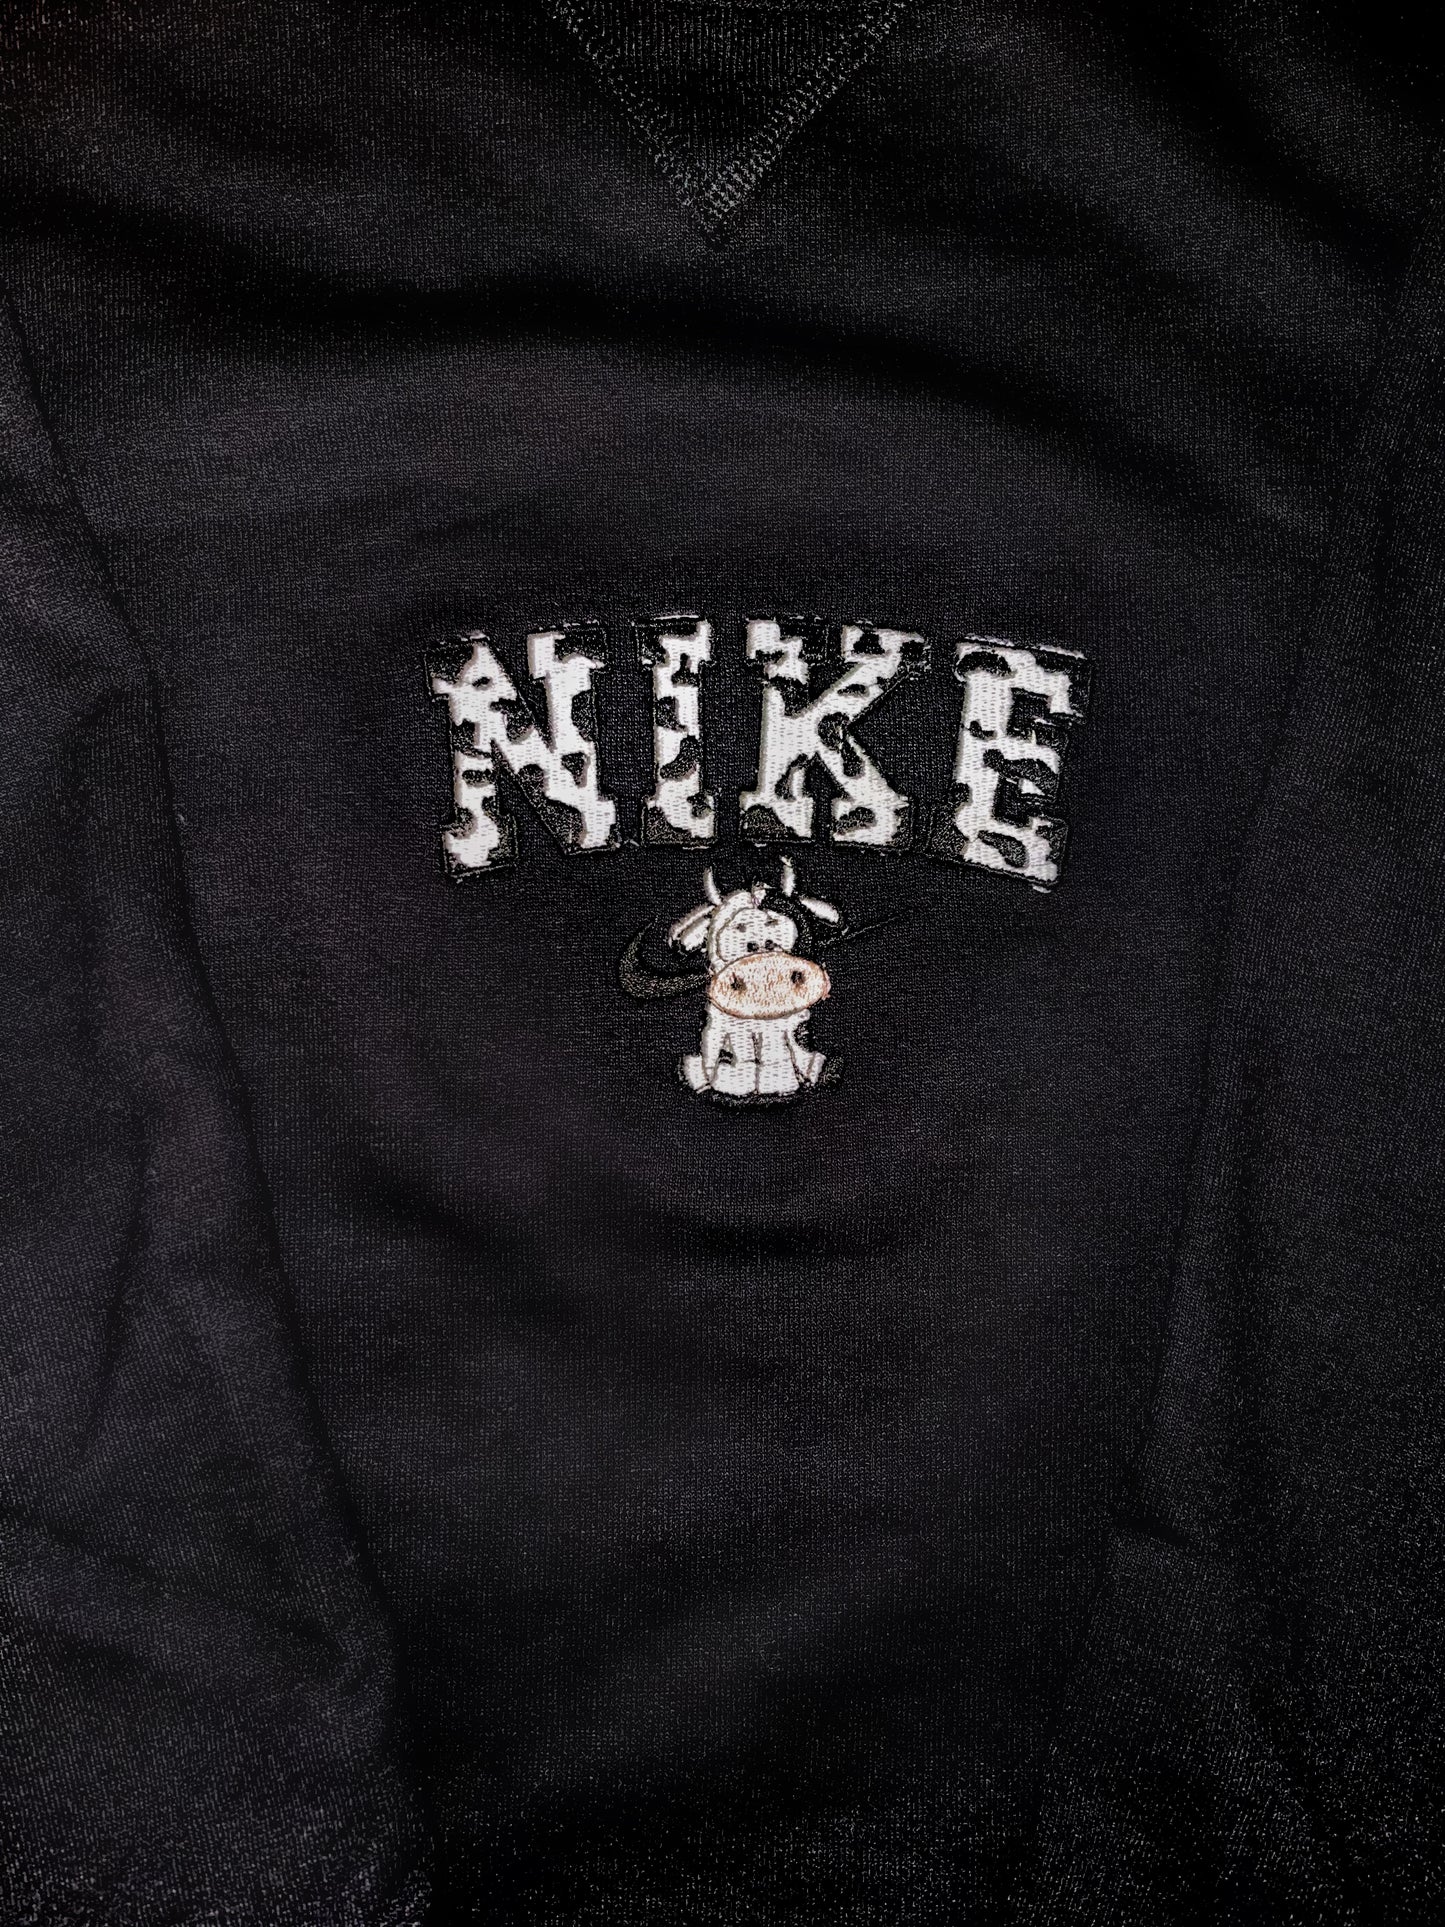 Nike cow inspired sweater